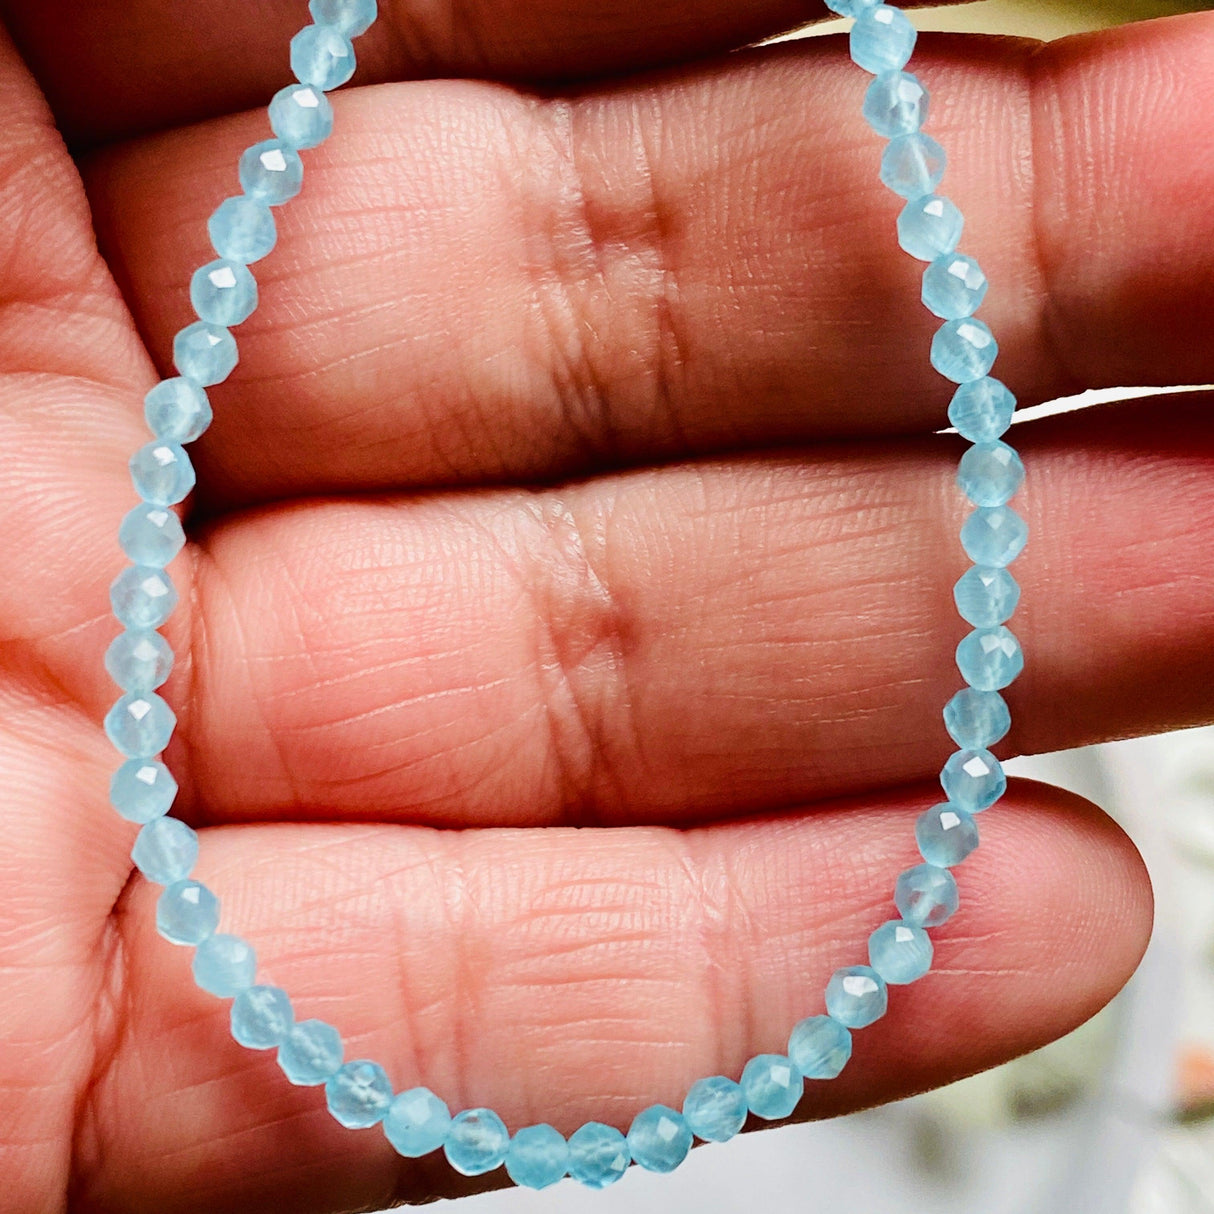 Micro Bead Necklace - Blue Chalcedony - Nature's Magick